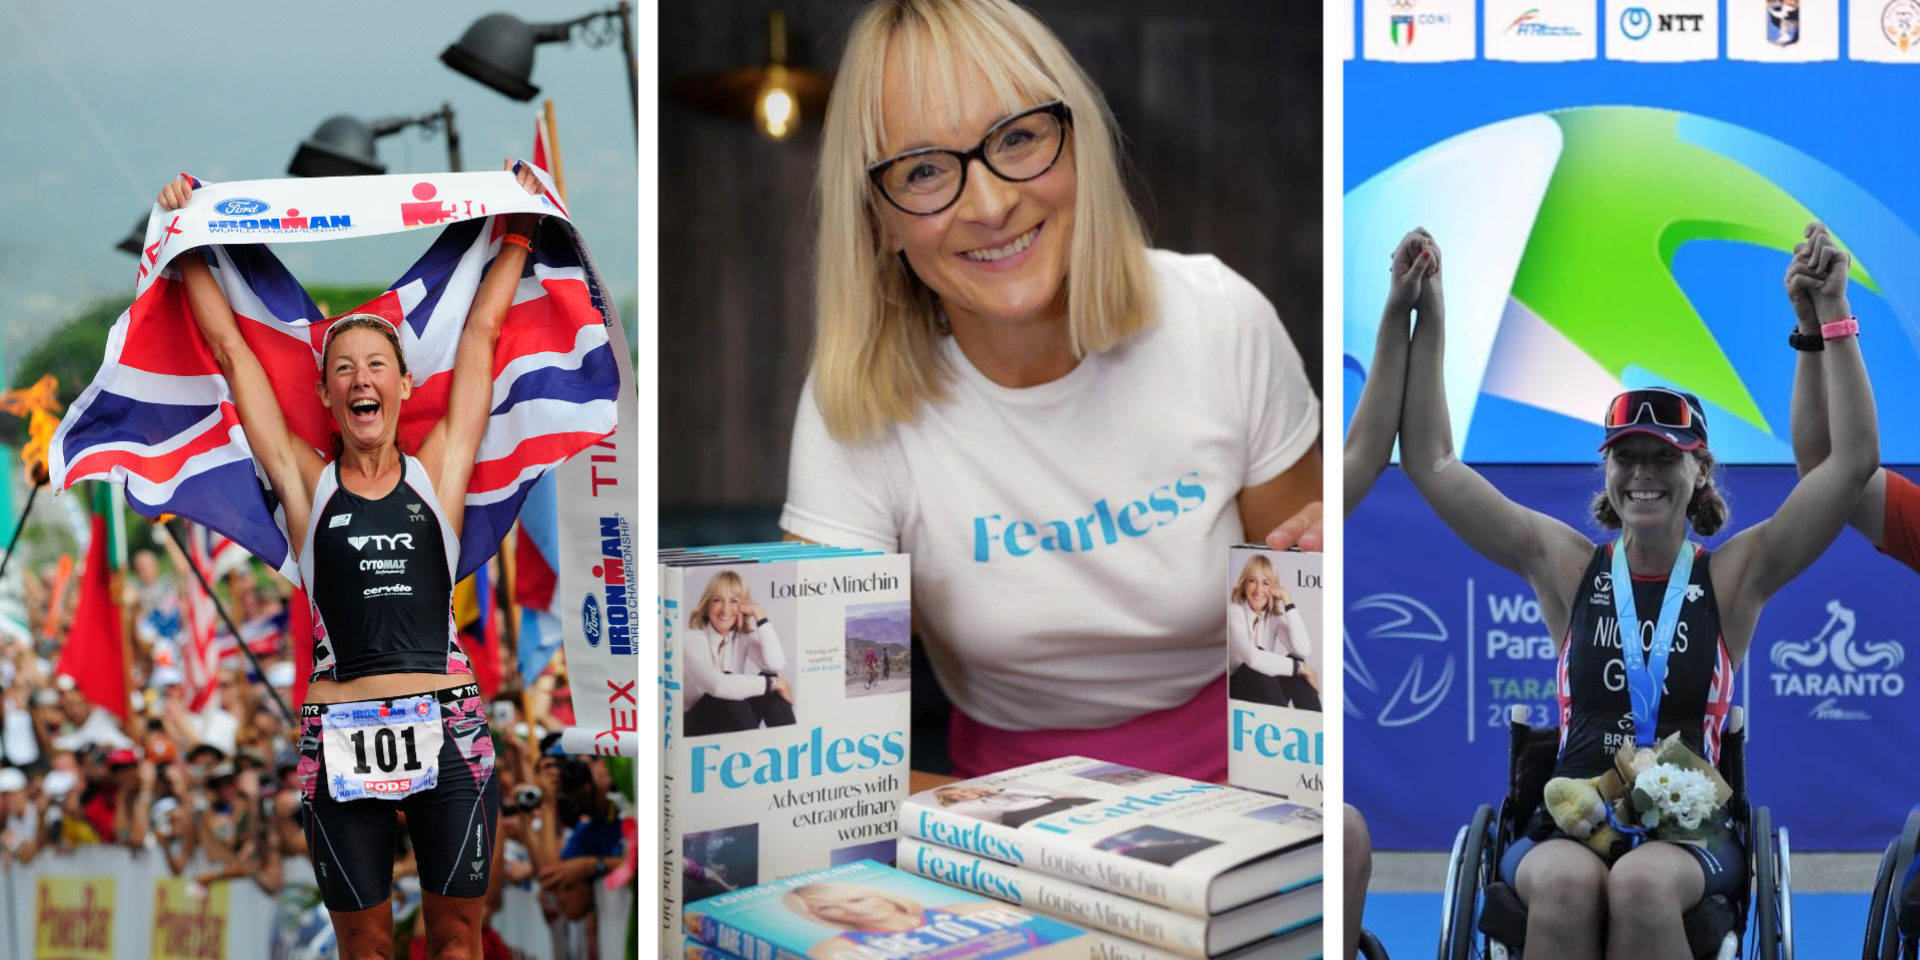 Remarkable Feats: An Evening with Chrissie Wellington &#038; Mel Nicholls, hosted by Louise Minchin